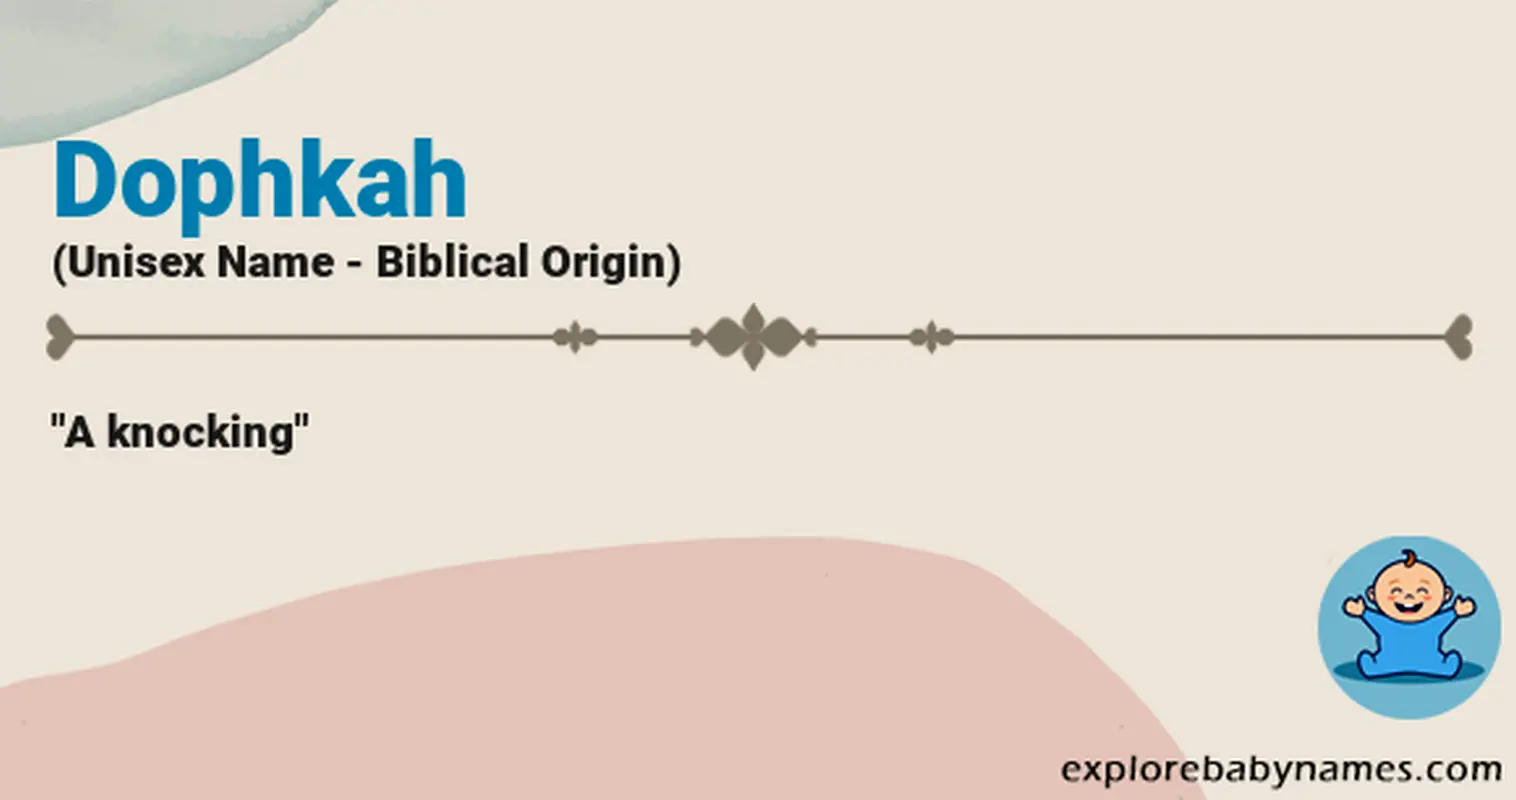 Meaning of Dophkah